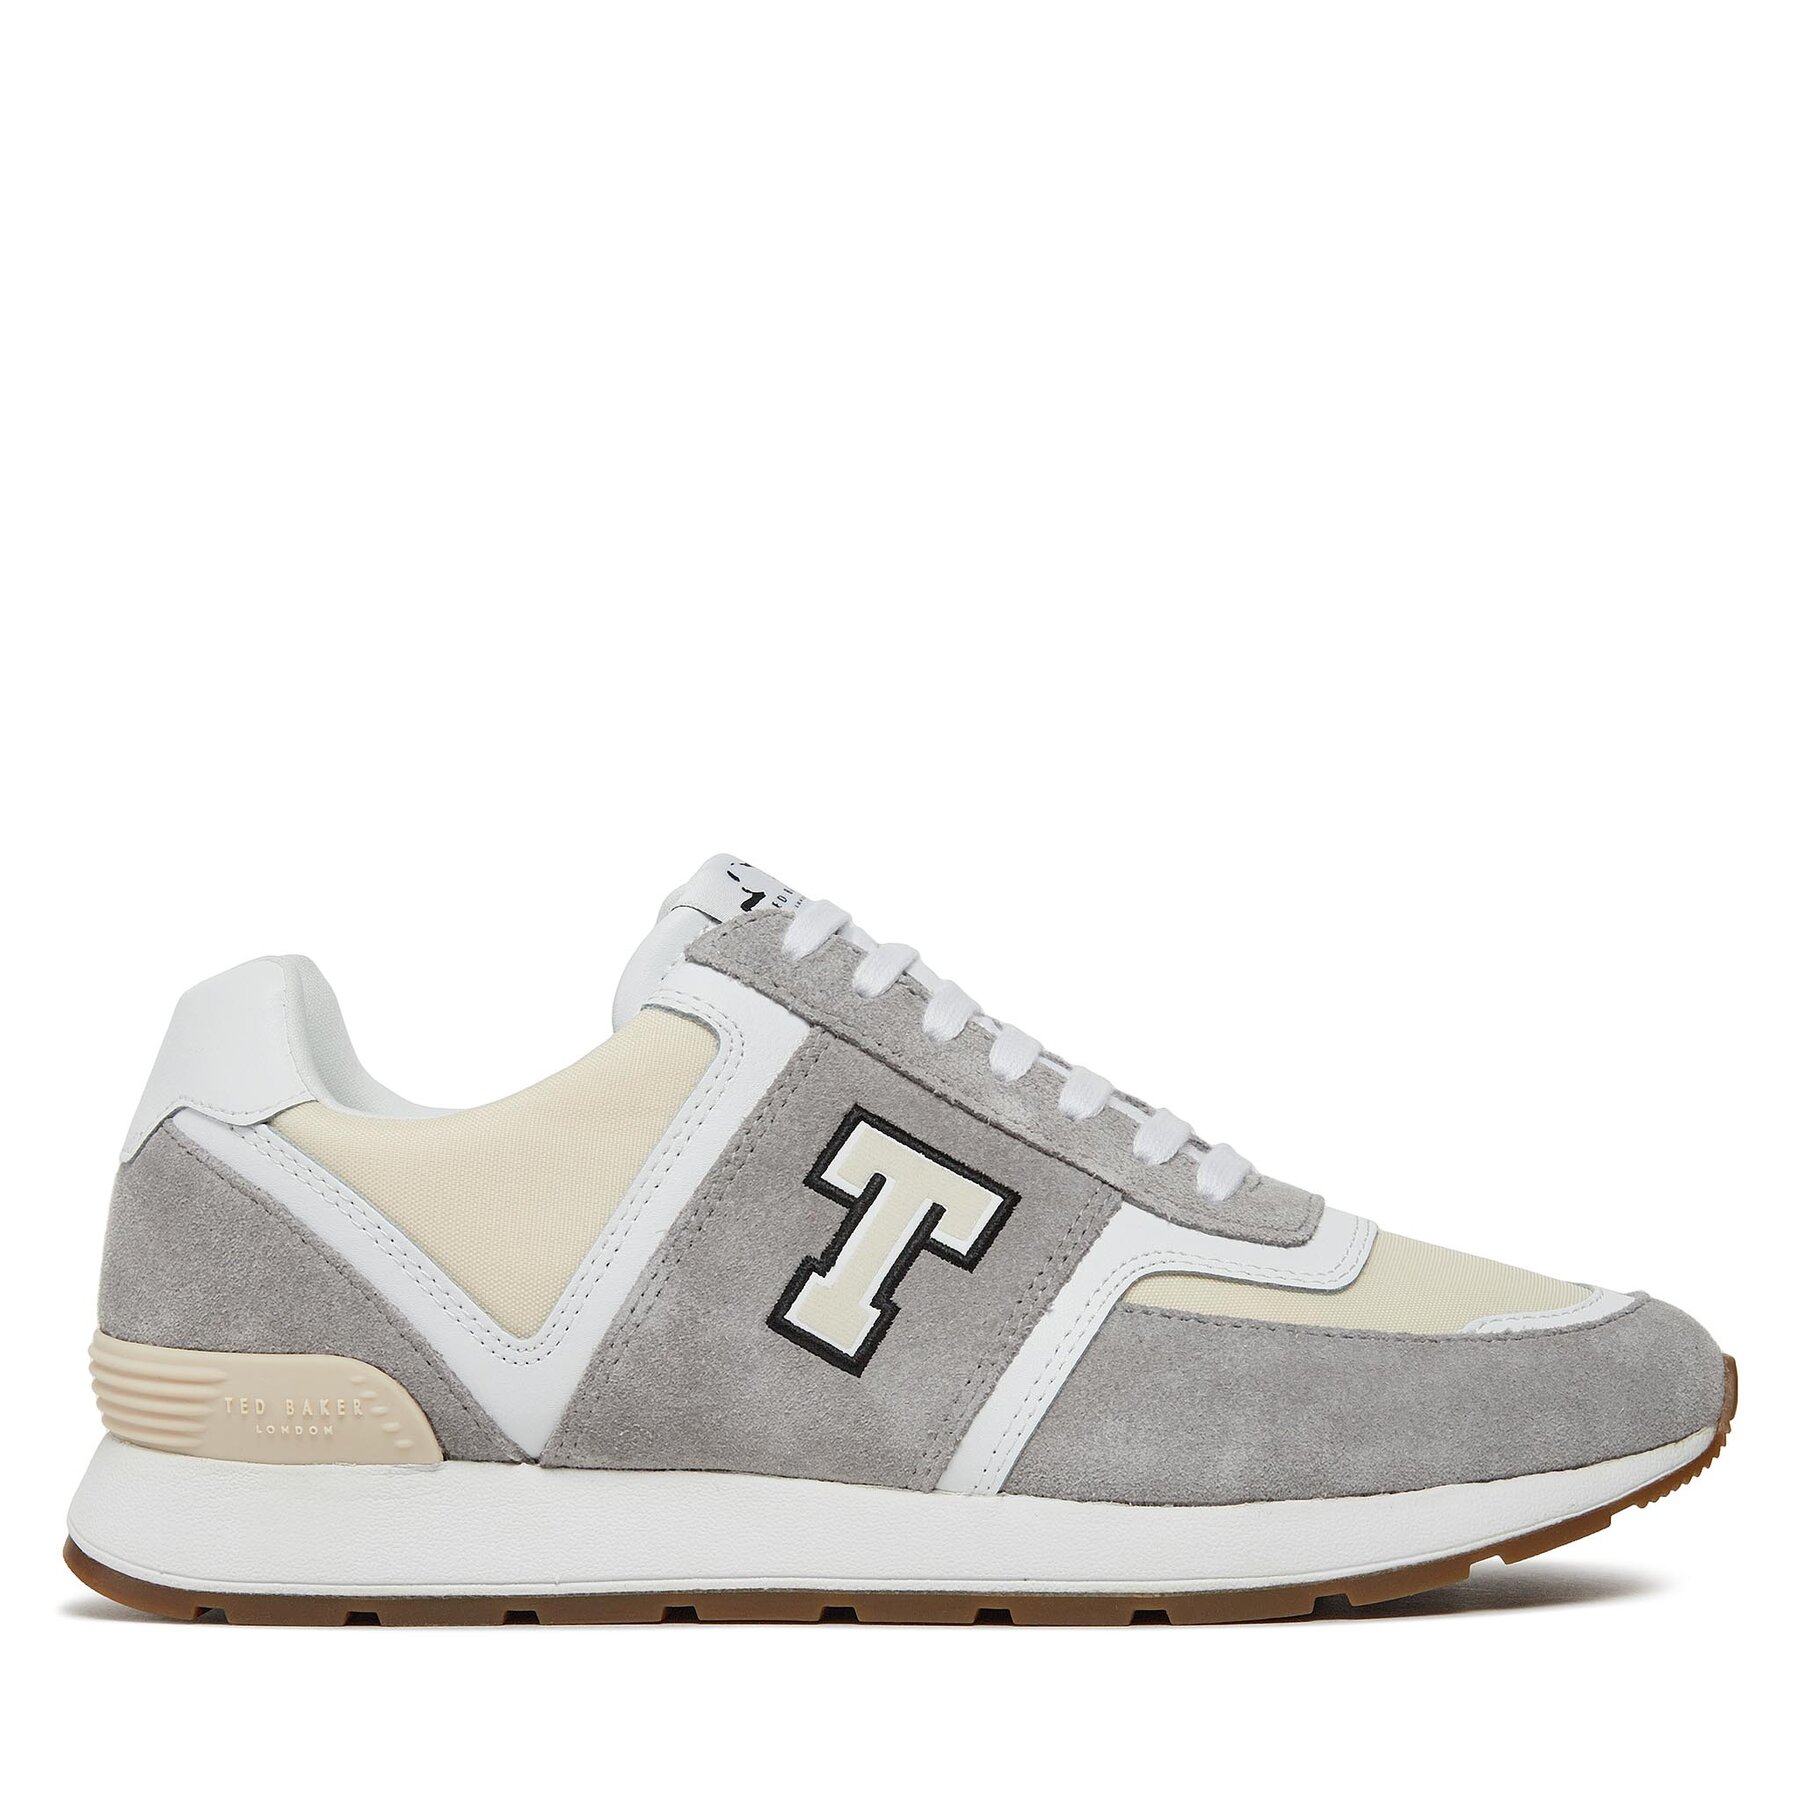 Sneakers Ted Baker Gregory 256661 Mid/Grey von Ted Baker